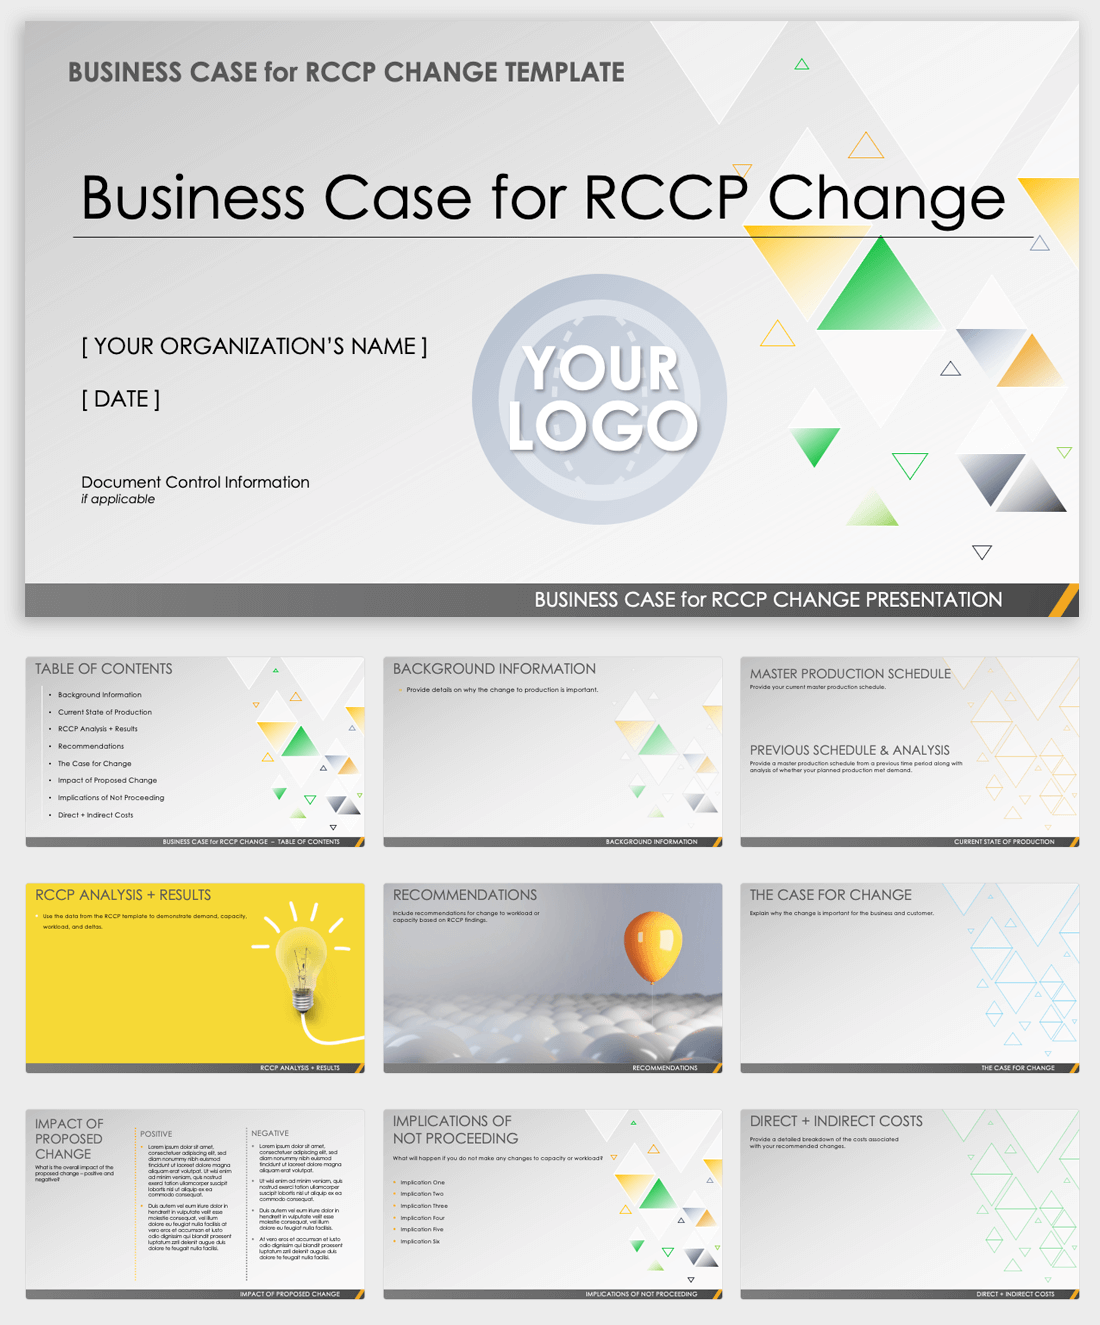 Business Case for RCCP Change Presentation Template